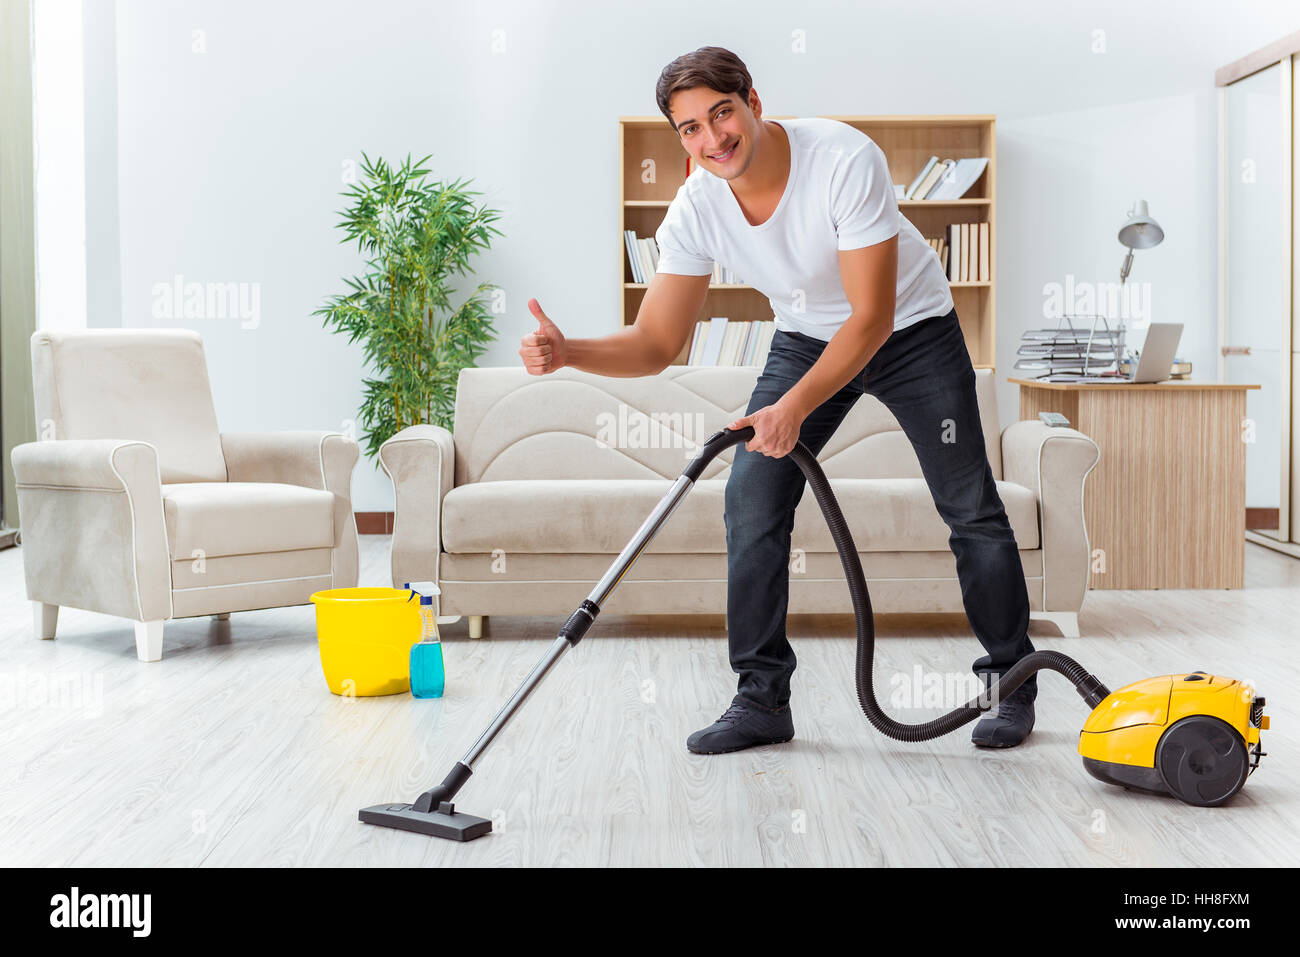 https://c8.alamy.com/comp/HH8FXM/man-husband-cleaning-the-house-helping-wife-HH8FXM.jpg